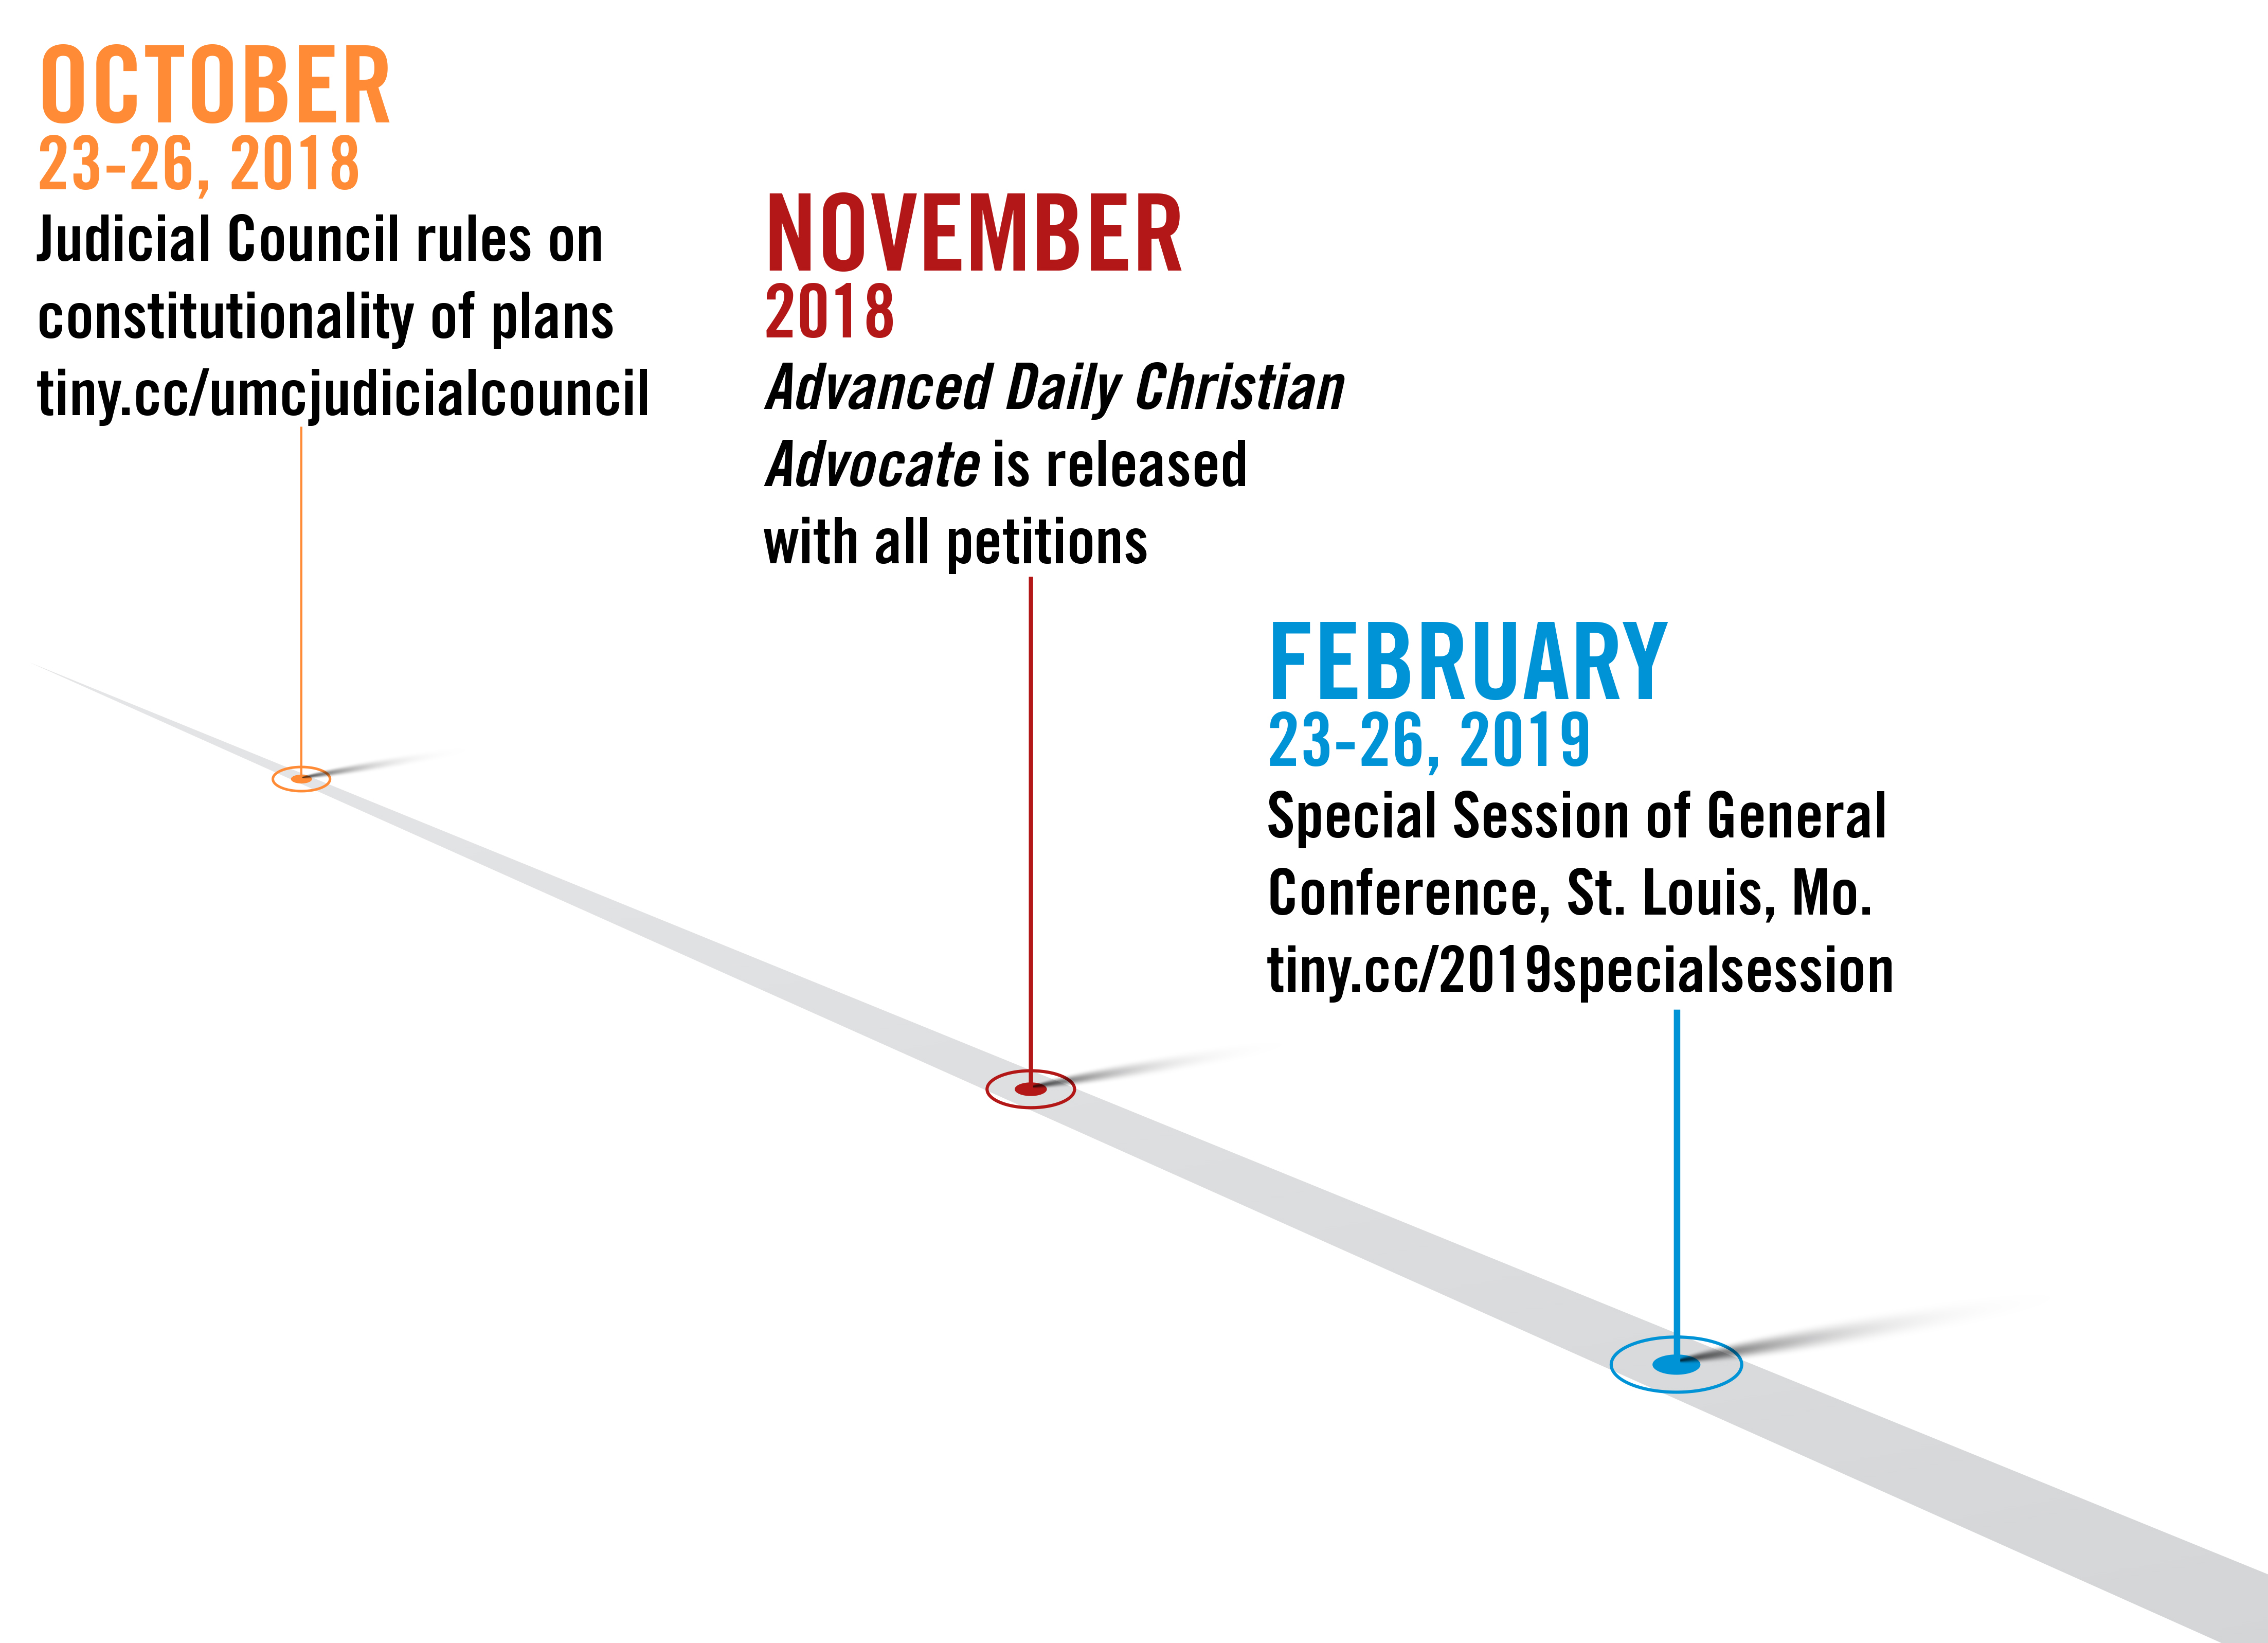 A timeline of the lead up to the 2019 general conference